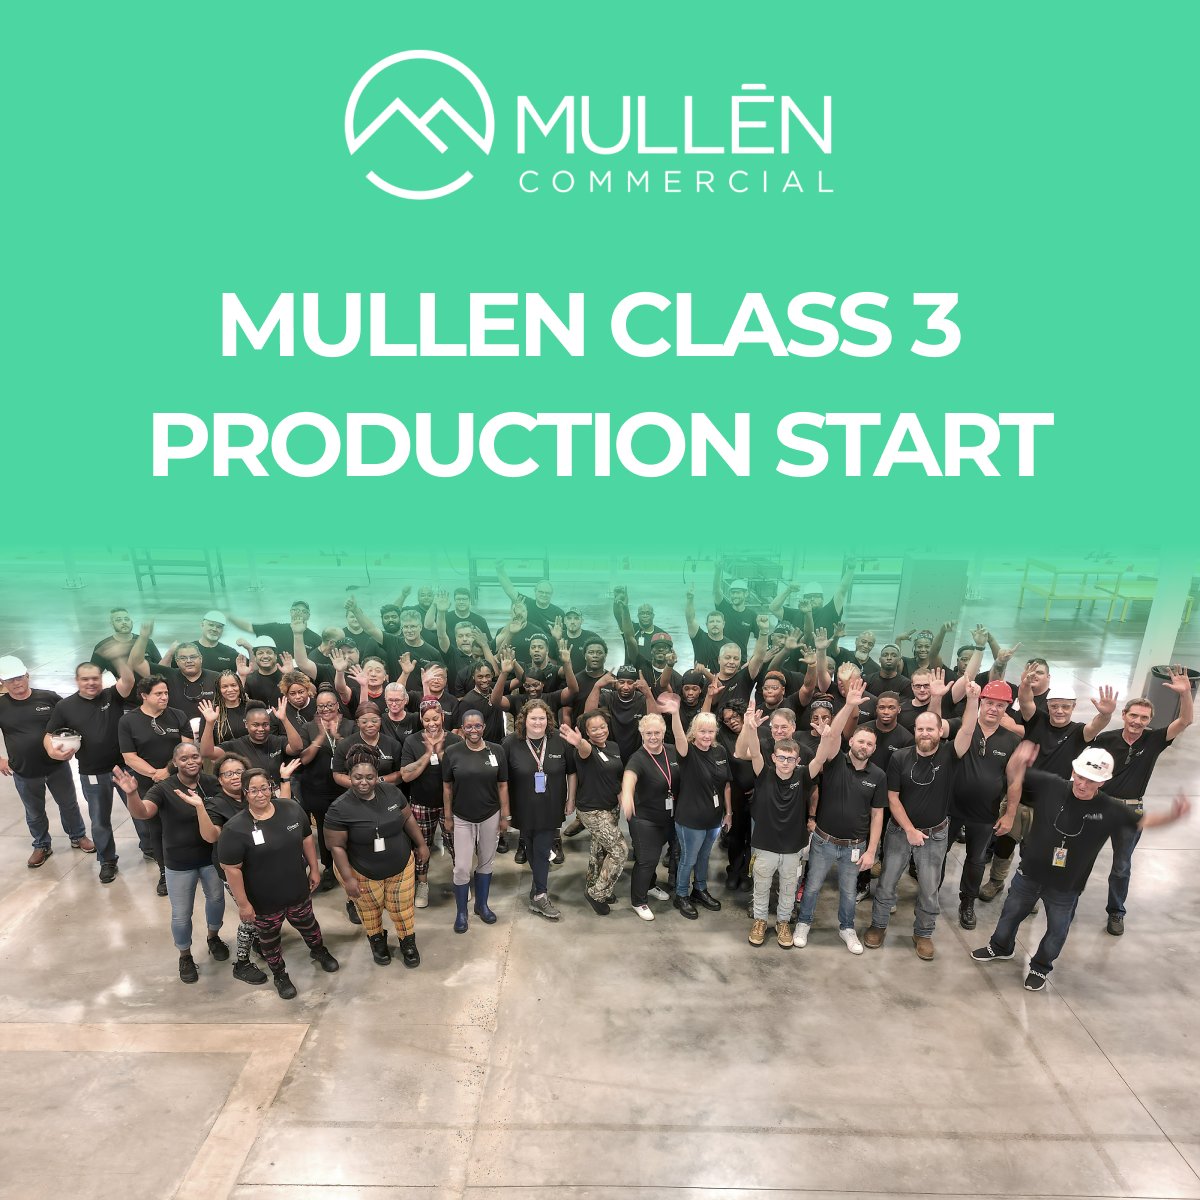 Hello from our team in Tunica 👋

$MULN #MullenAutomotive #MullenUSA #MullenCommercial #Class3 #MullenTHREE #EVTruck #LowCabForward #EV #EVManufacturing #ProductionStart #GreenTechnology #DriveElectric #CommercialEV #GreenFleet